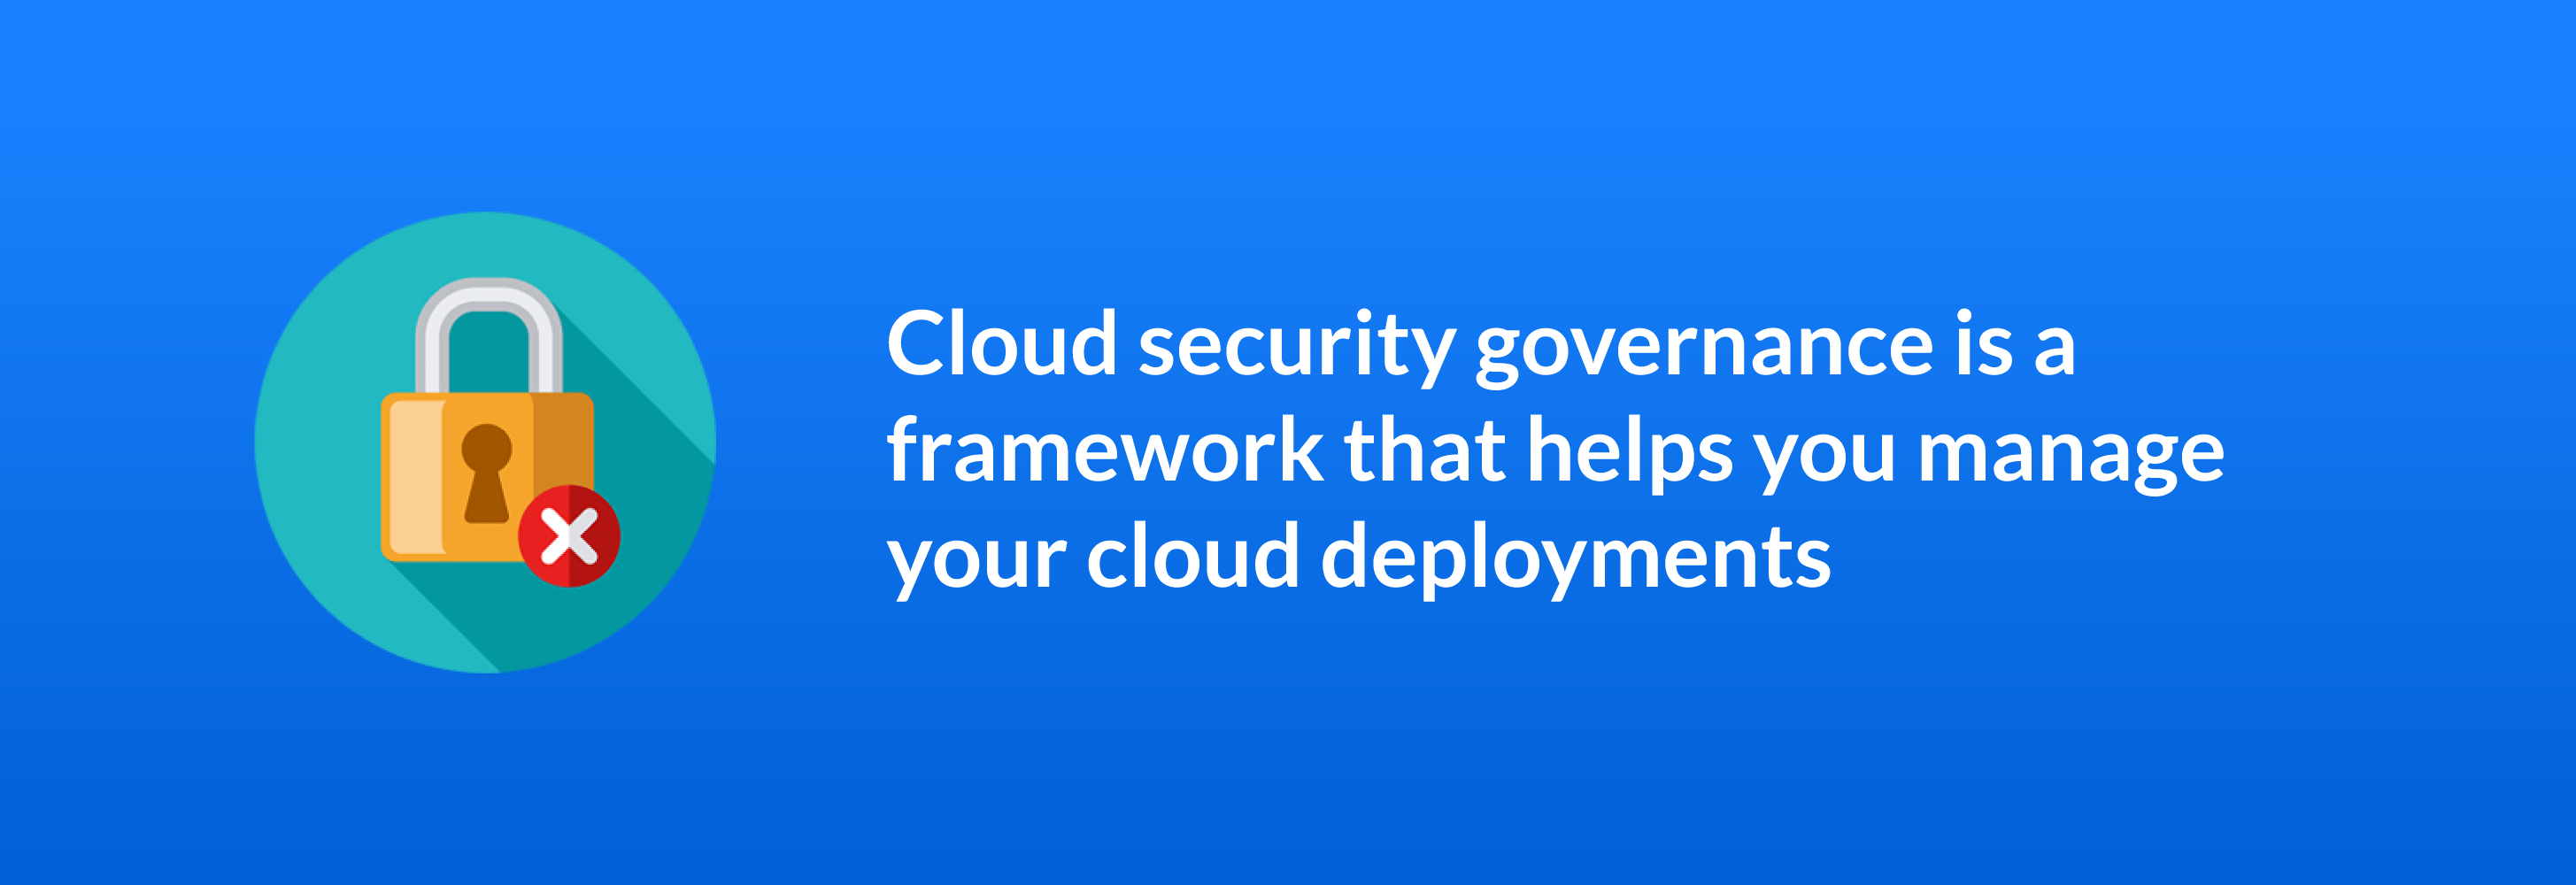 Cloud security governance is a framework that helps you manage your cloud deployments